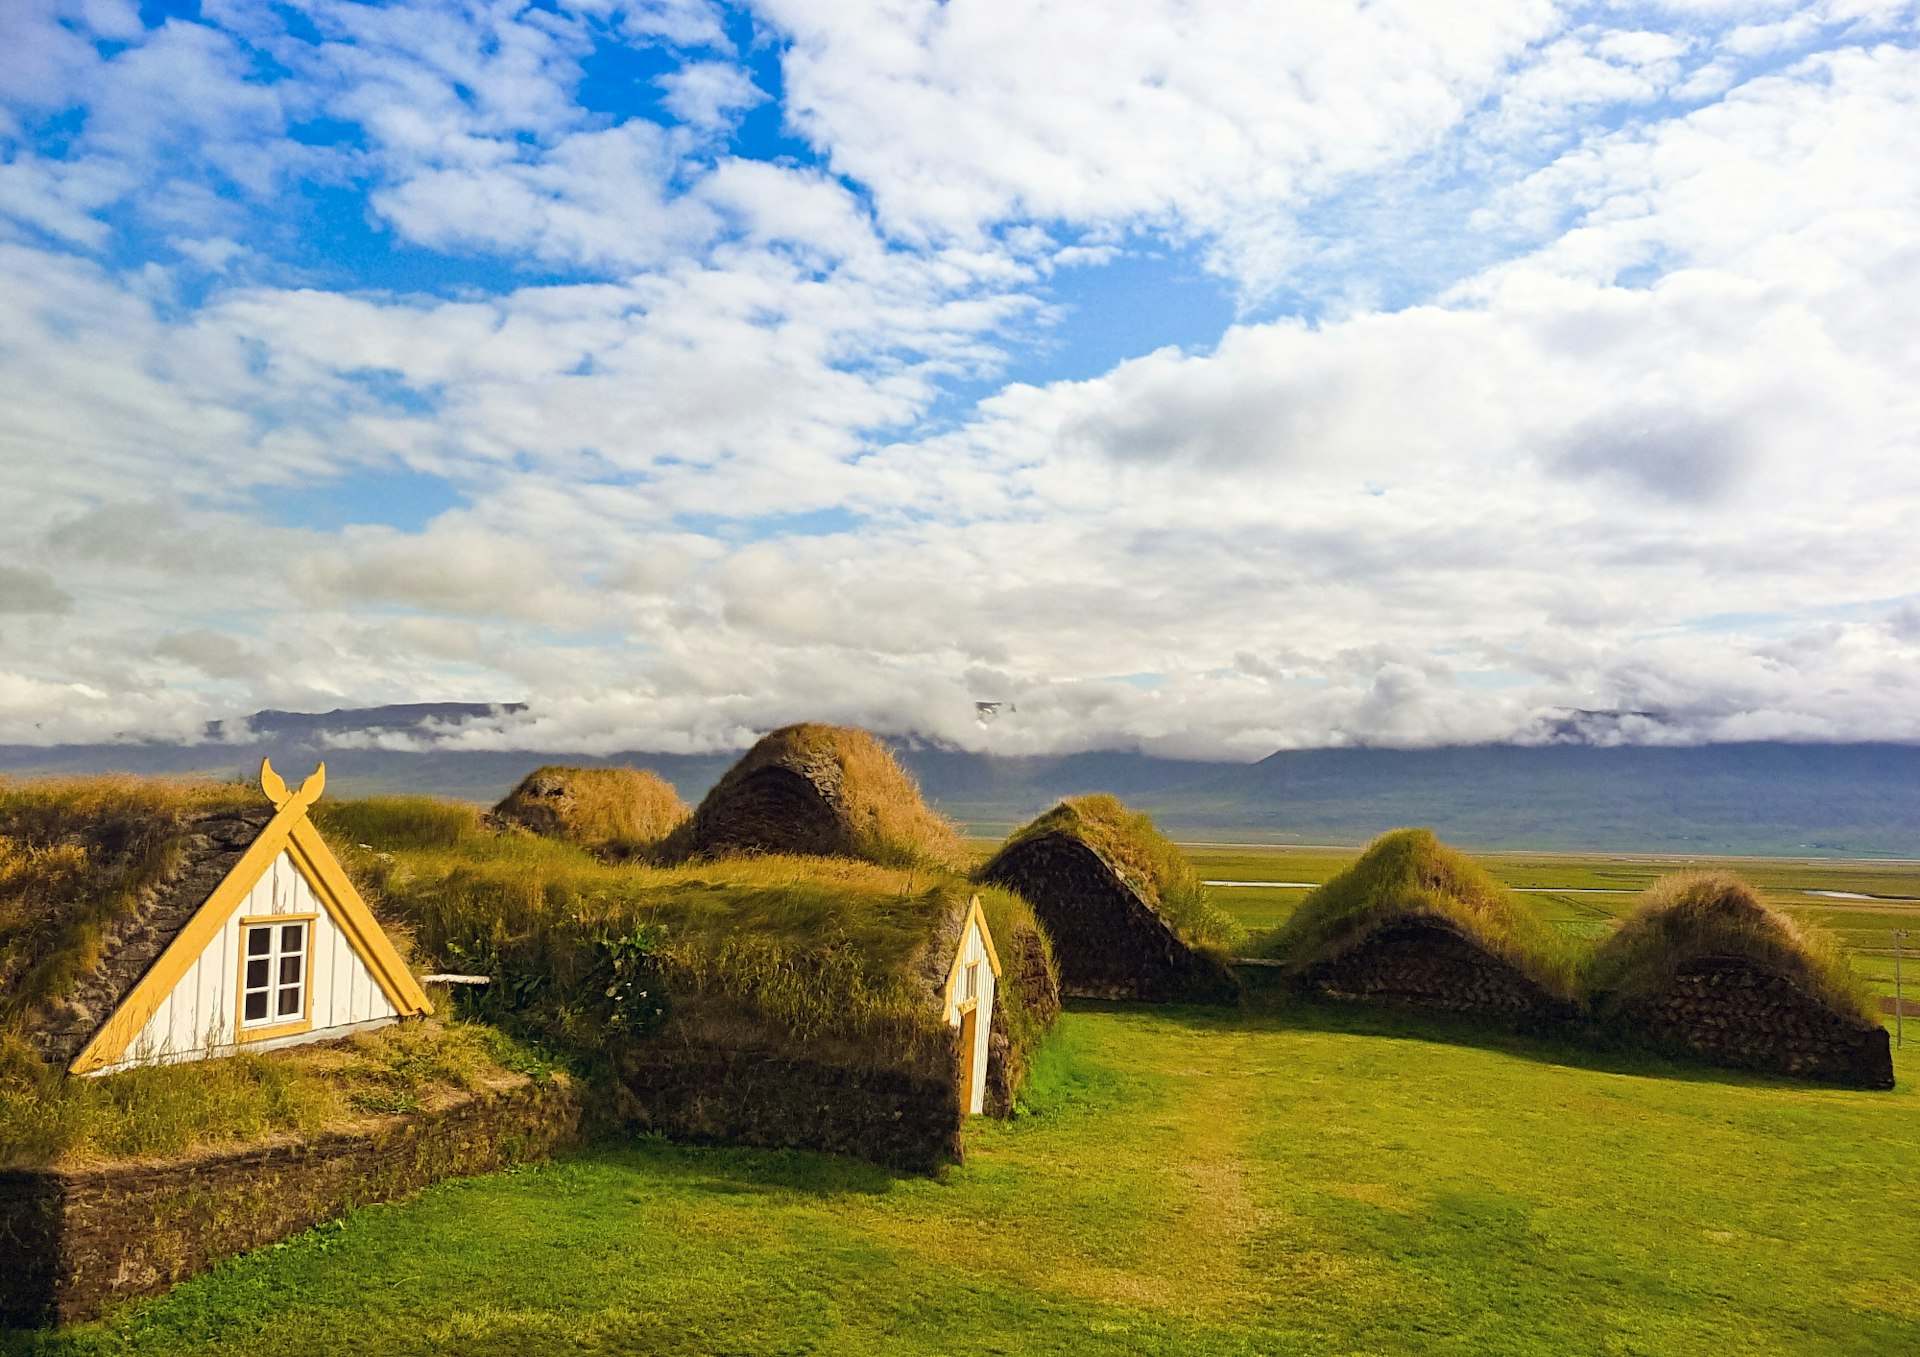 Traditional turfed, low-lying Icelandic houses evolved from Viking longhouses. Image by Rigamondis / iStock / Getty